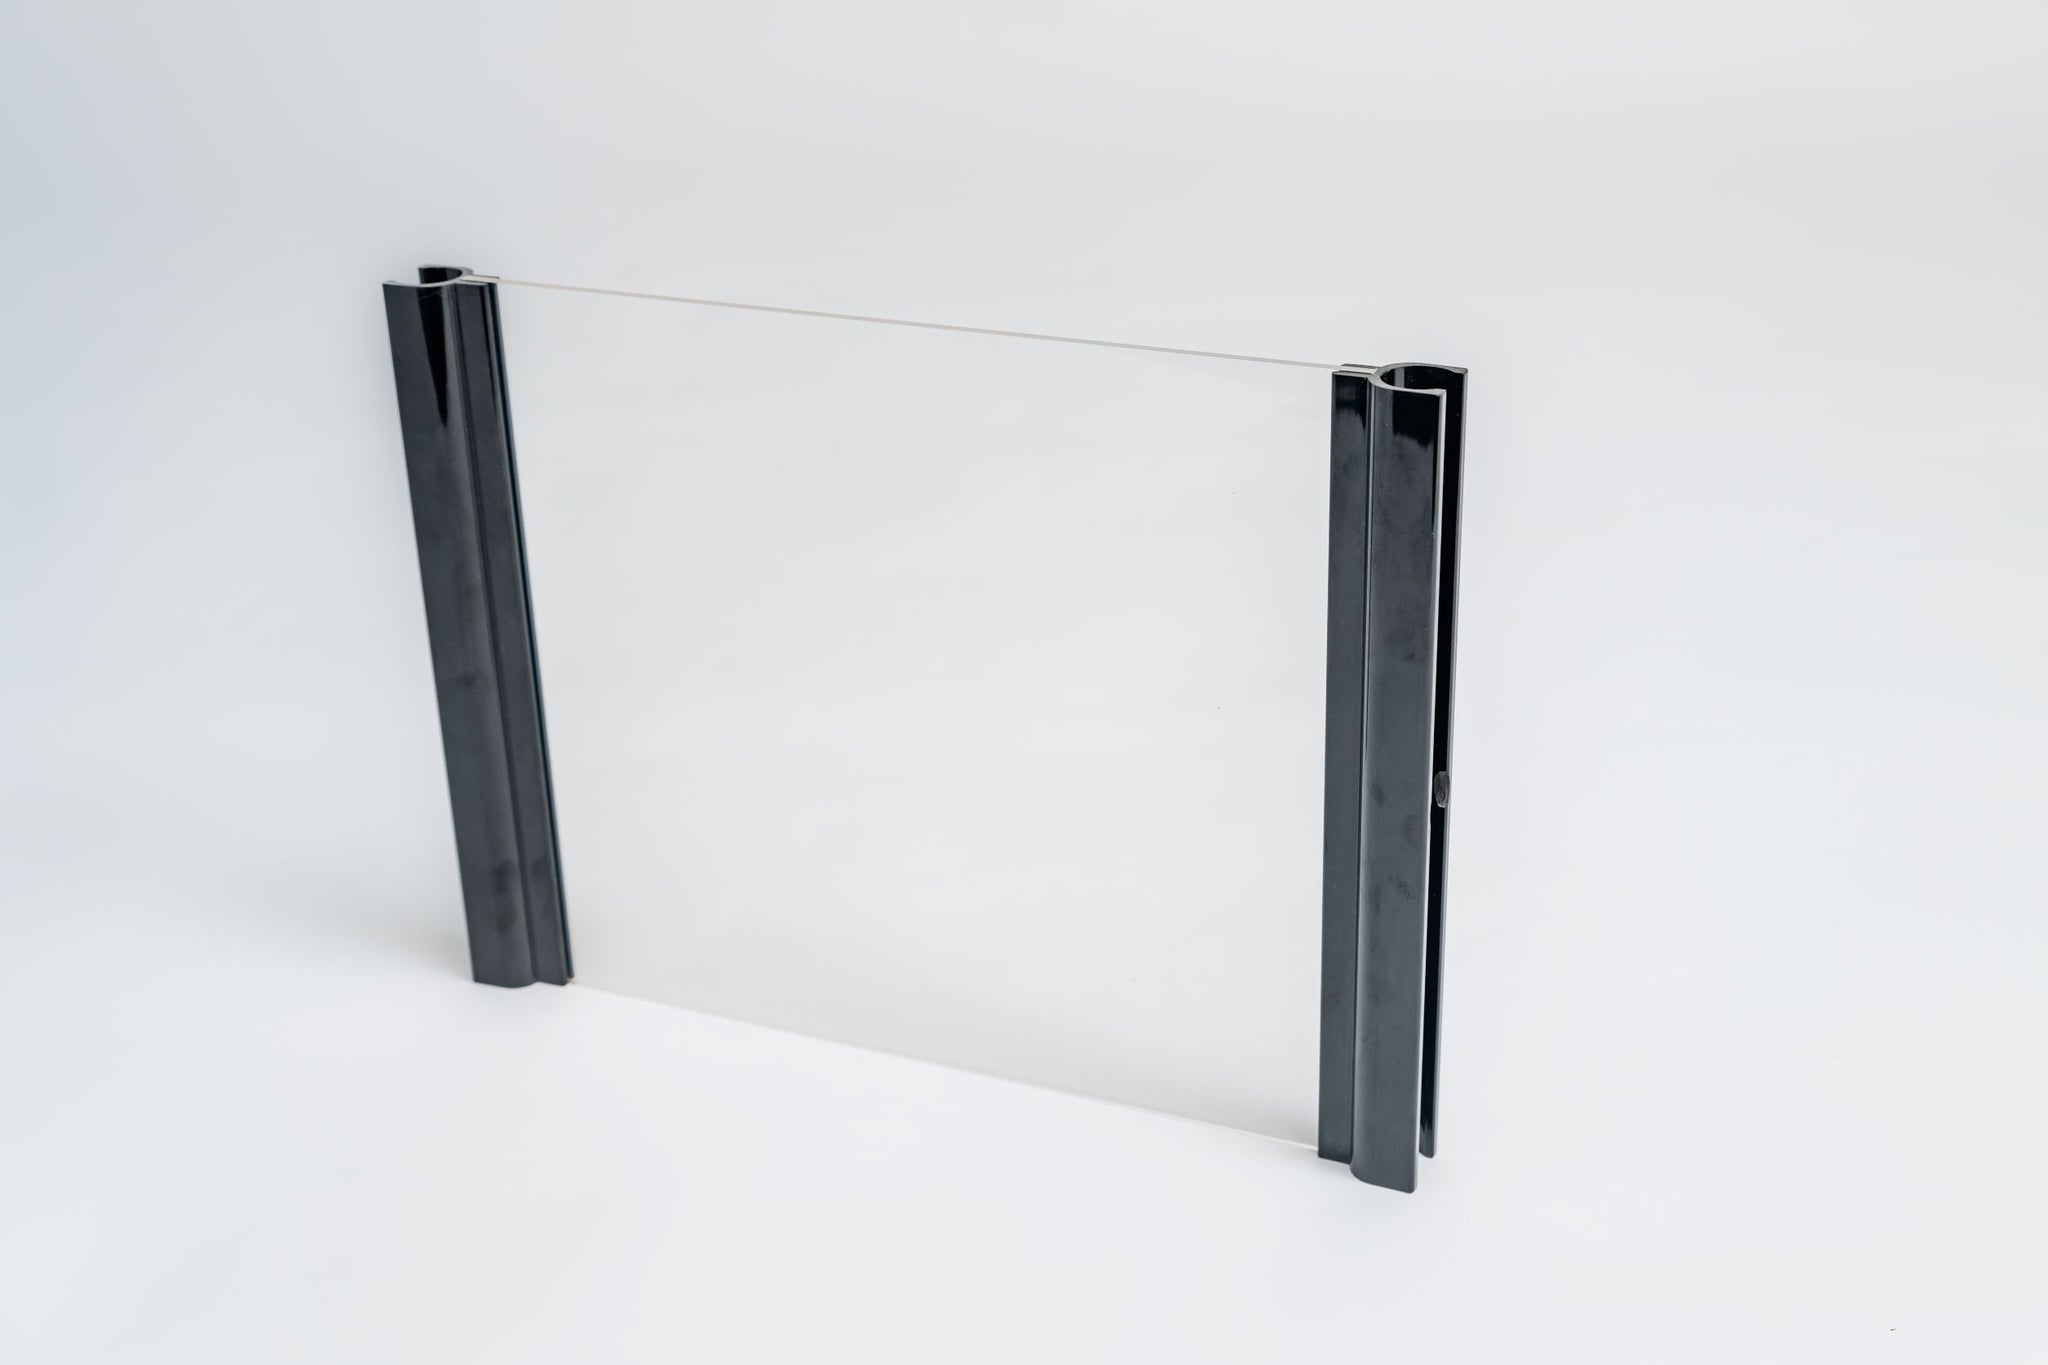 Acrylic Glass Door Sets for EZclassic Whelping Boxes (Standard and Tall)